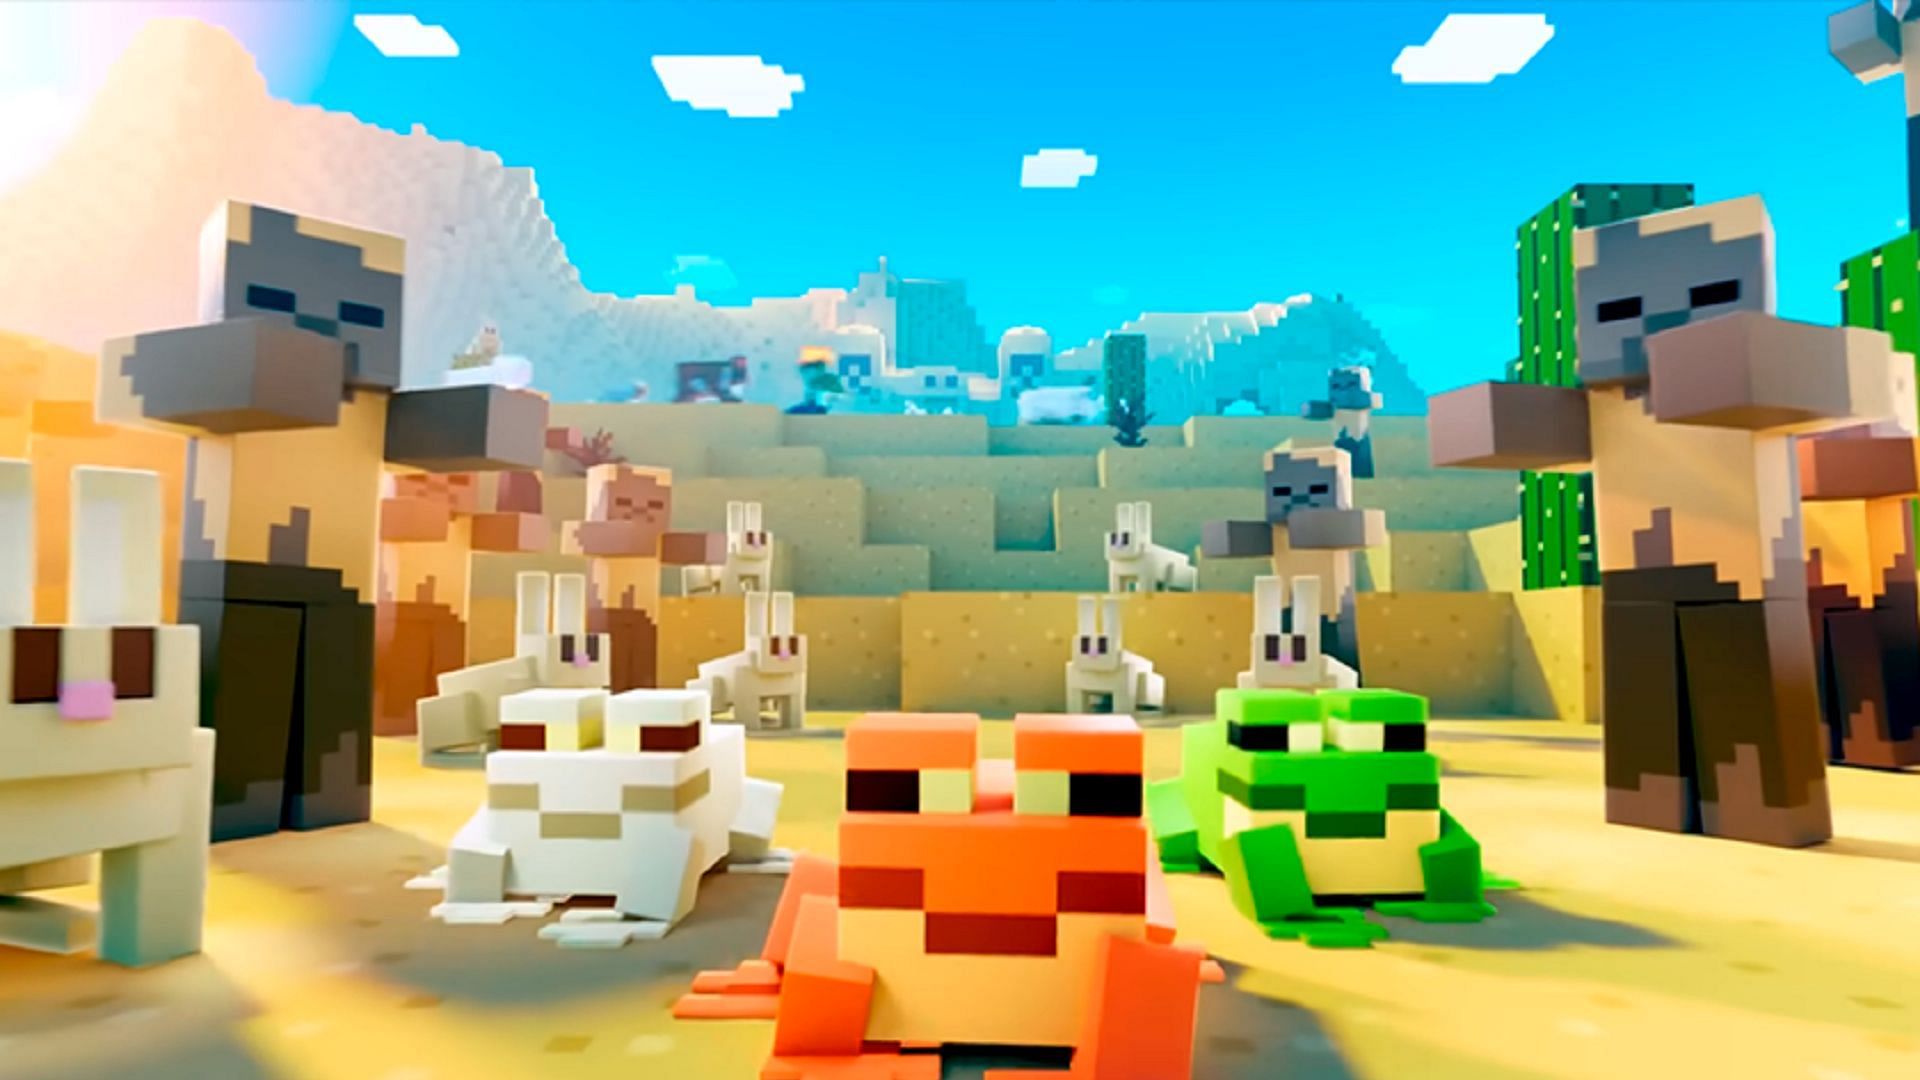 Dancing frogs were featured in Minecraft Live&#039;s announcement trailer this year (Image via Minecraft/YouTube)